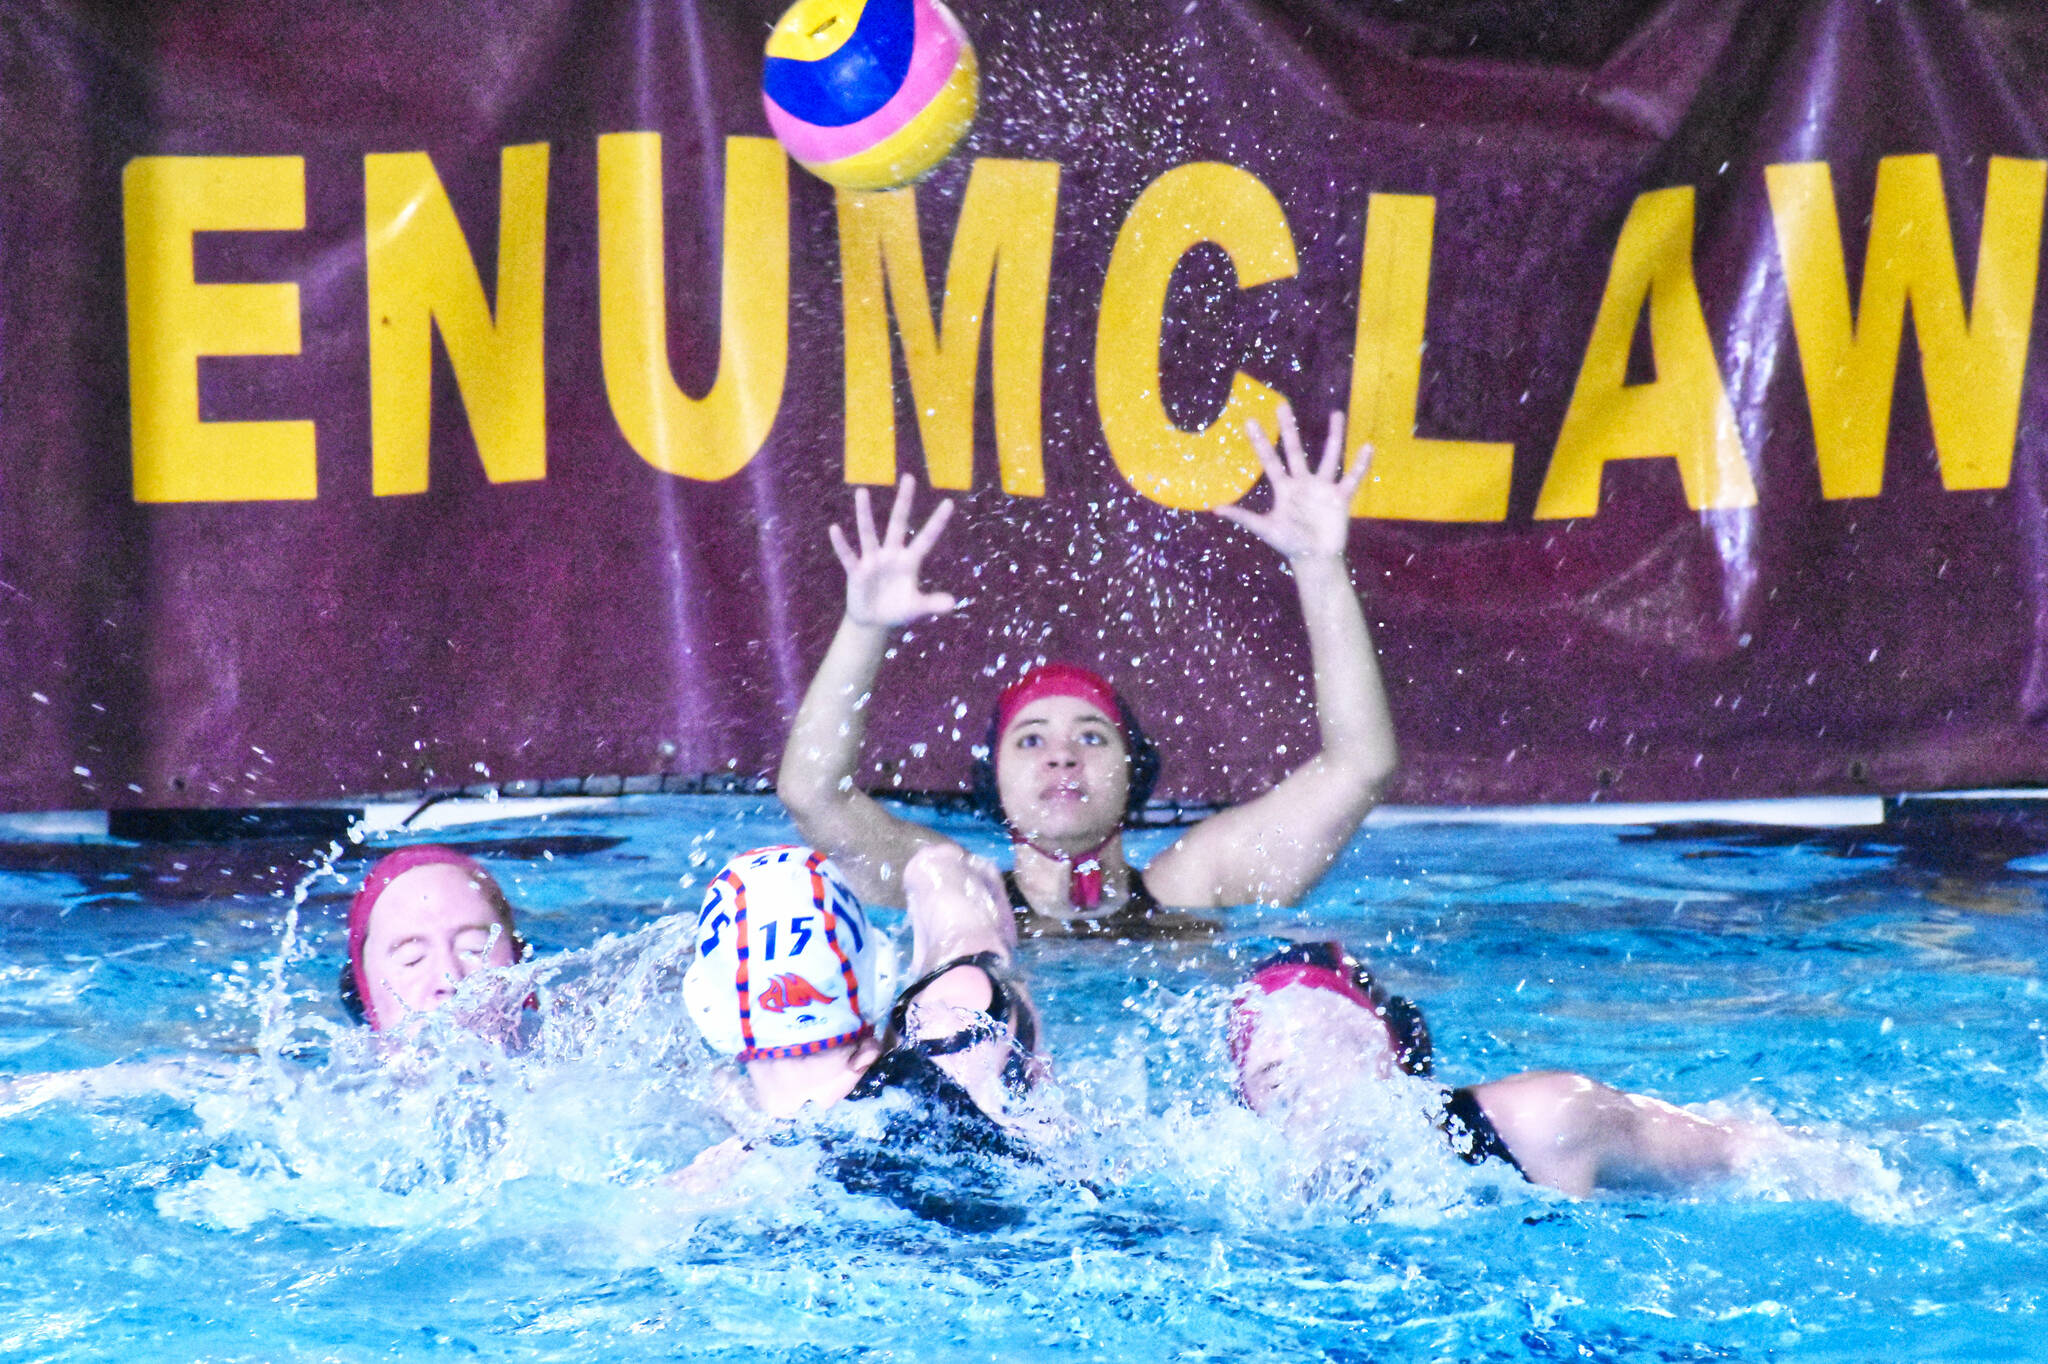 The Enumclaw Aquatic Center was alive Friday afternoon with the sounds of high school water polo action, when the Enumclaw girls hosted the squad from Auburn Mountainview. Pictured here are Adele Razor in goal. The EHS team will be busy this week, hosting Kentridge today (Wednesday) and Auburn Riverside on Friday.